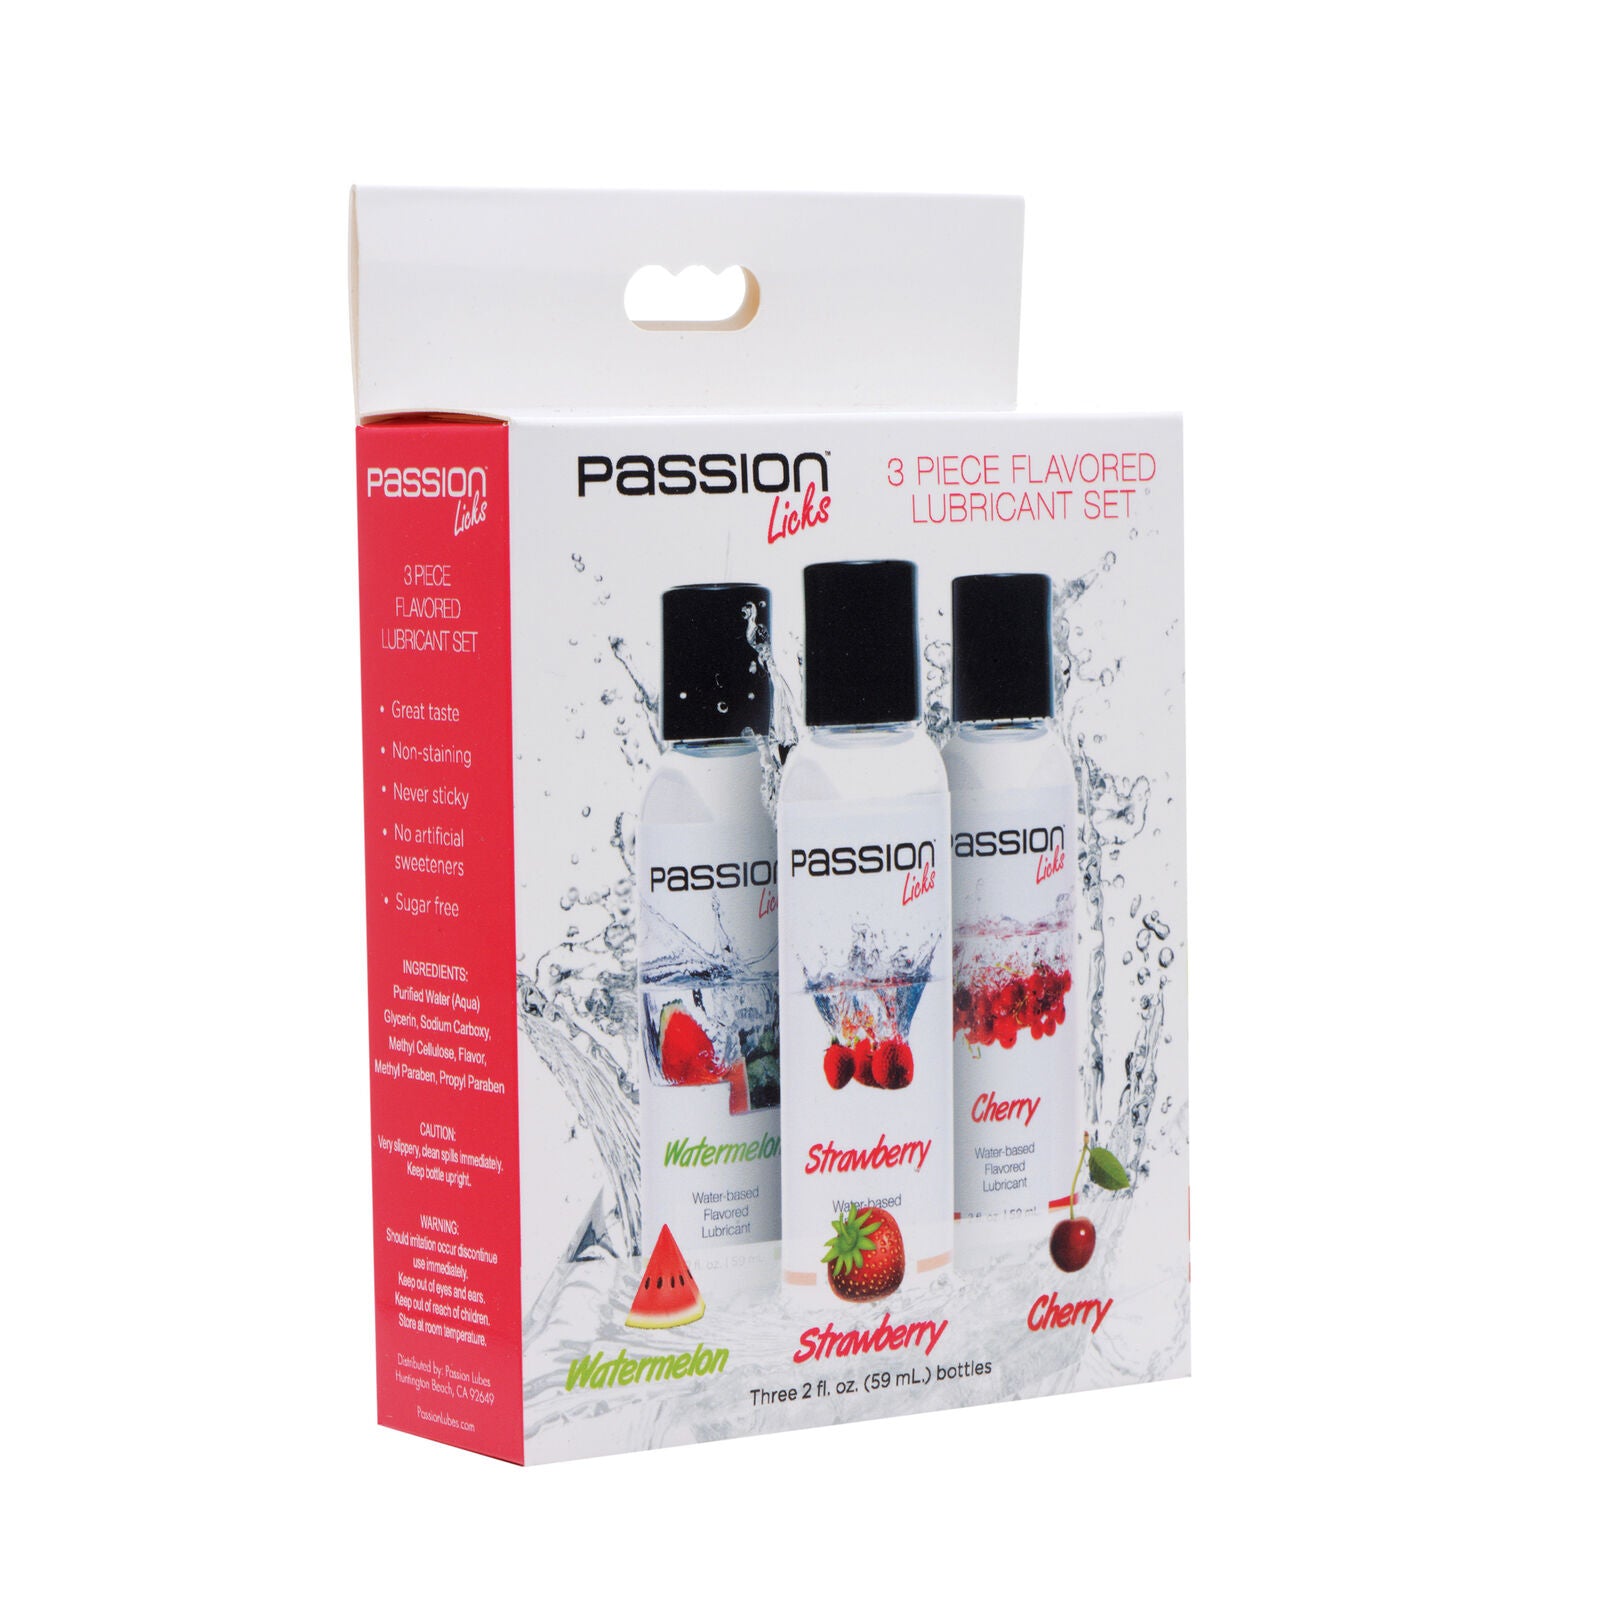 Pa Licks 3 Piece Flavored Lubricant Set